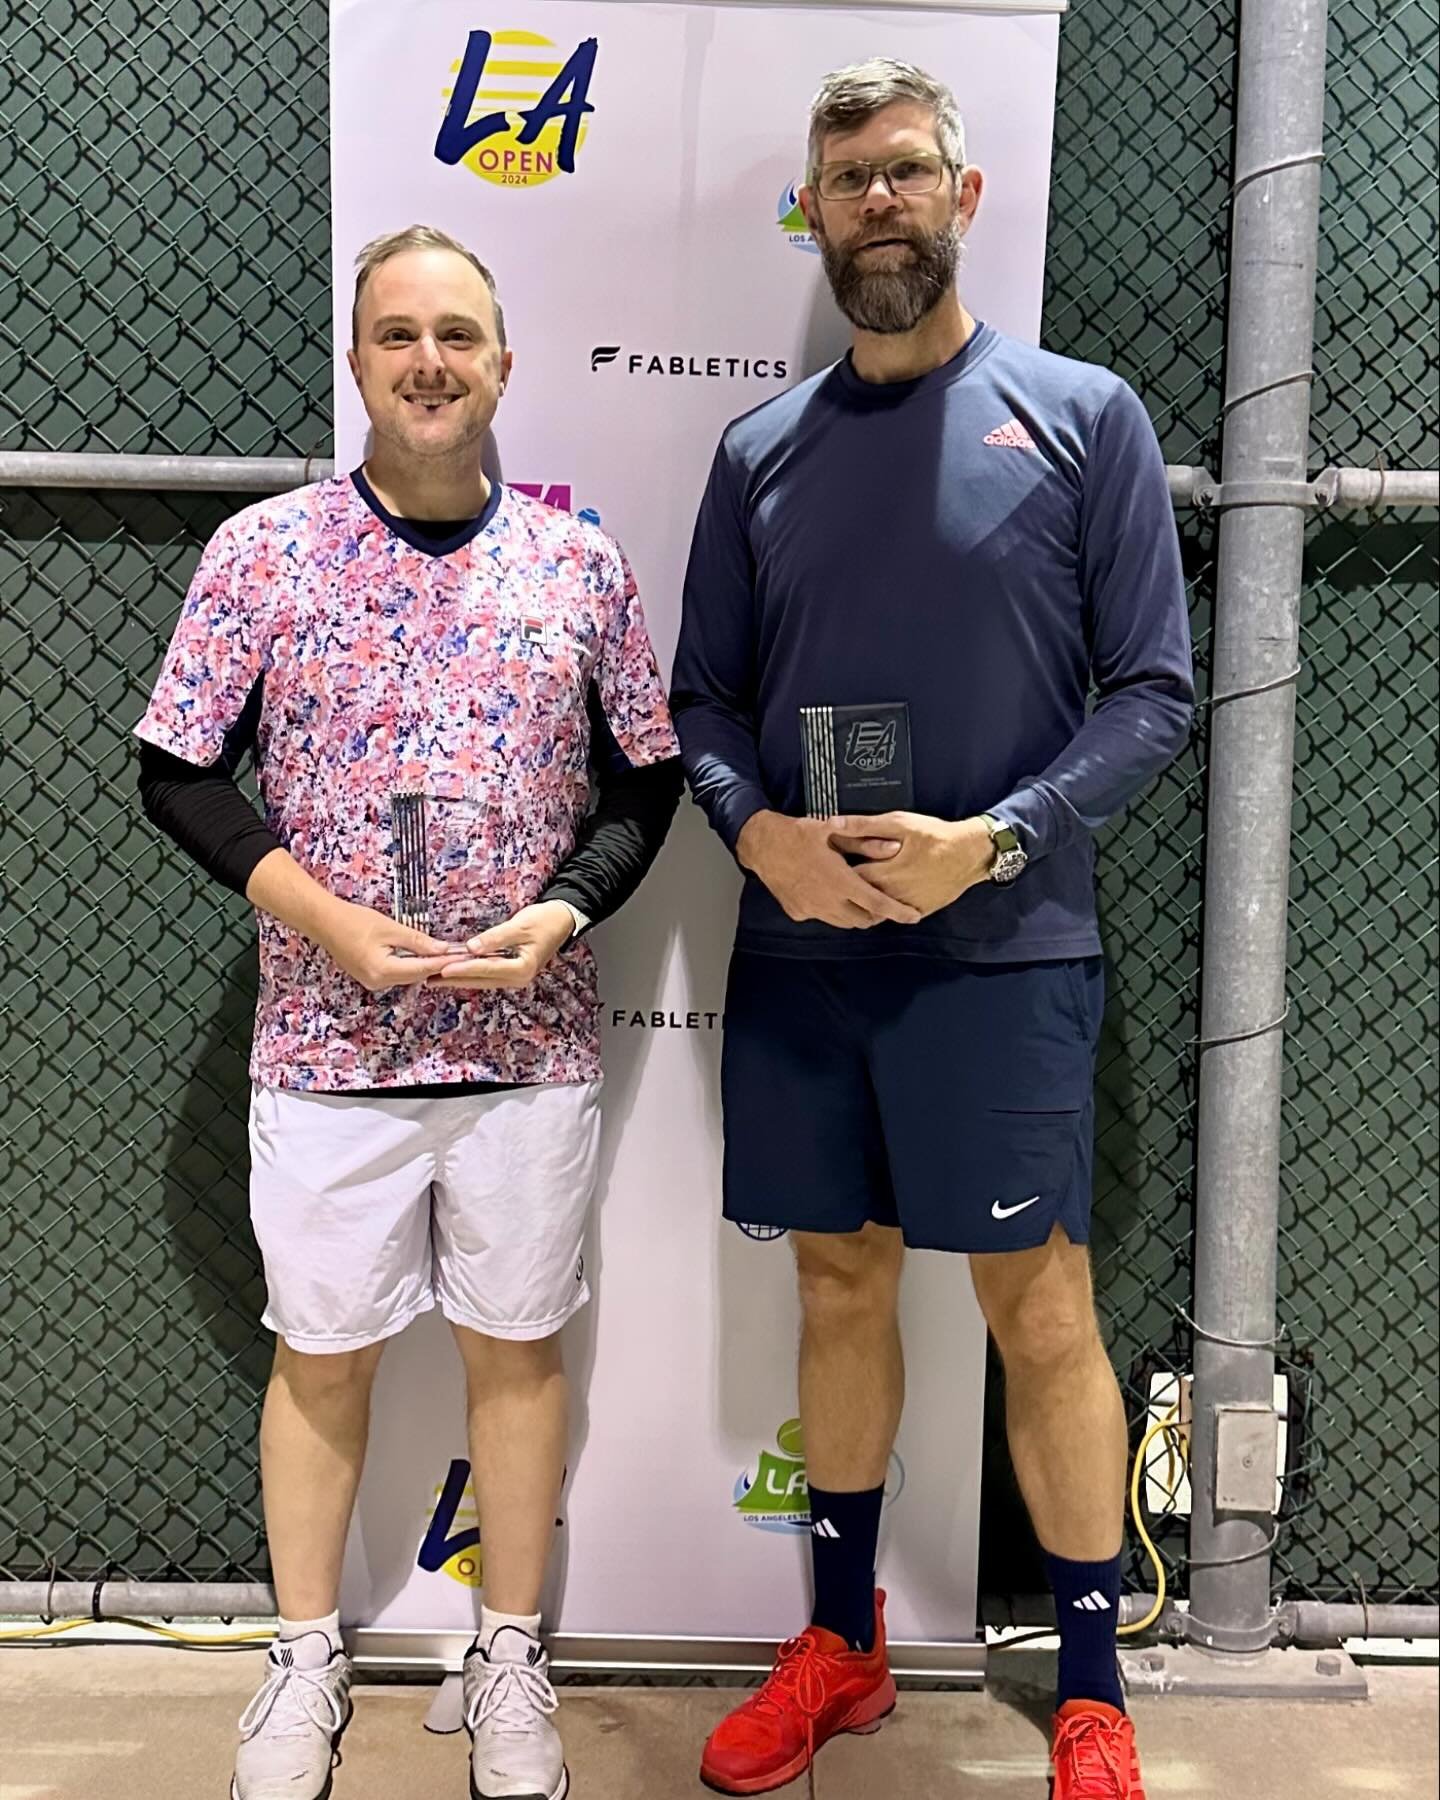 Today, I played in the LA Open, a yearly @gltaworldtour event hosted by @losangelestennisassociation. I made the quarterfinals in C Singles. My doubles partner Kelly &amp; I won the Vegas tournament at C Doubles a few months back, so we had to play B